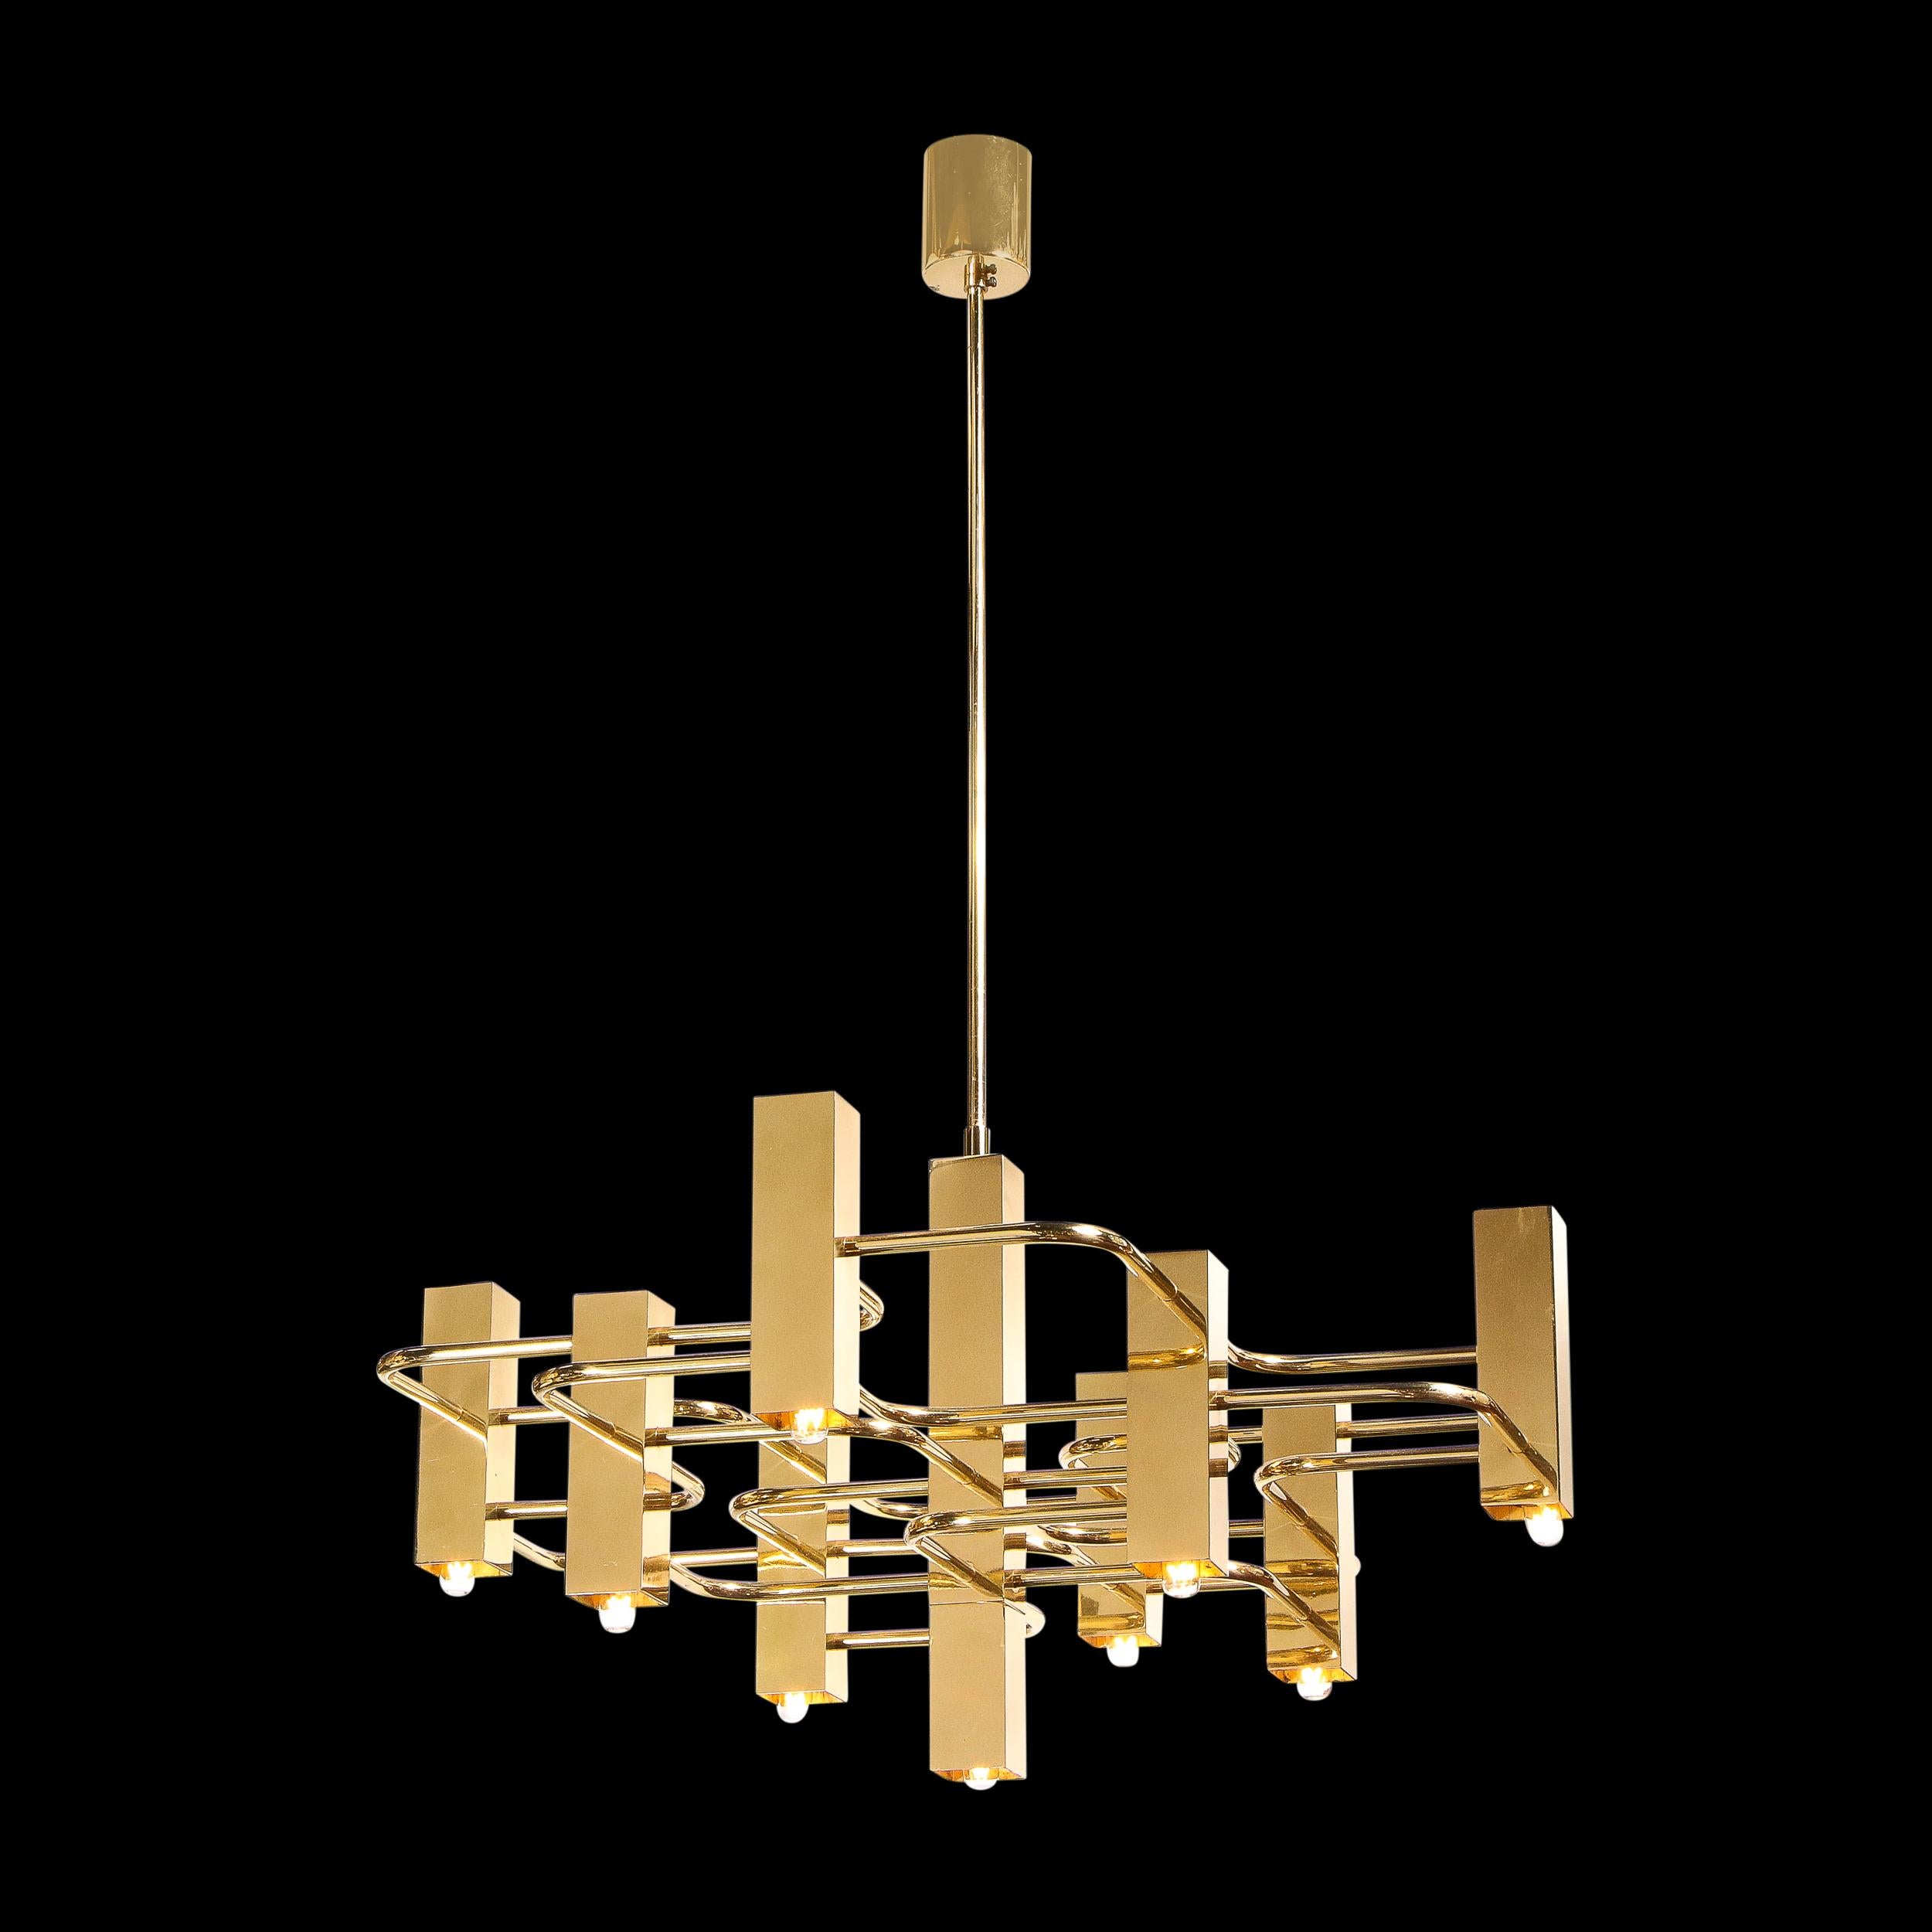 This stunning polished brass chandelier was realized in 1970s by famed lighting designer, Gaetano Sciolari. His designs were in high demand which made a considerable contribution to the success of the Italian design around the world, particularly